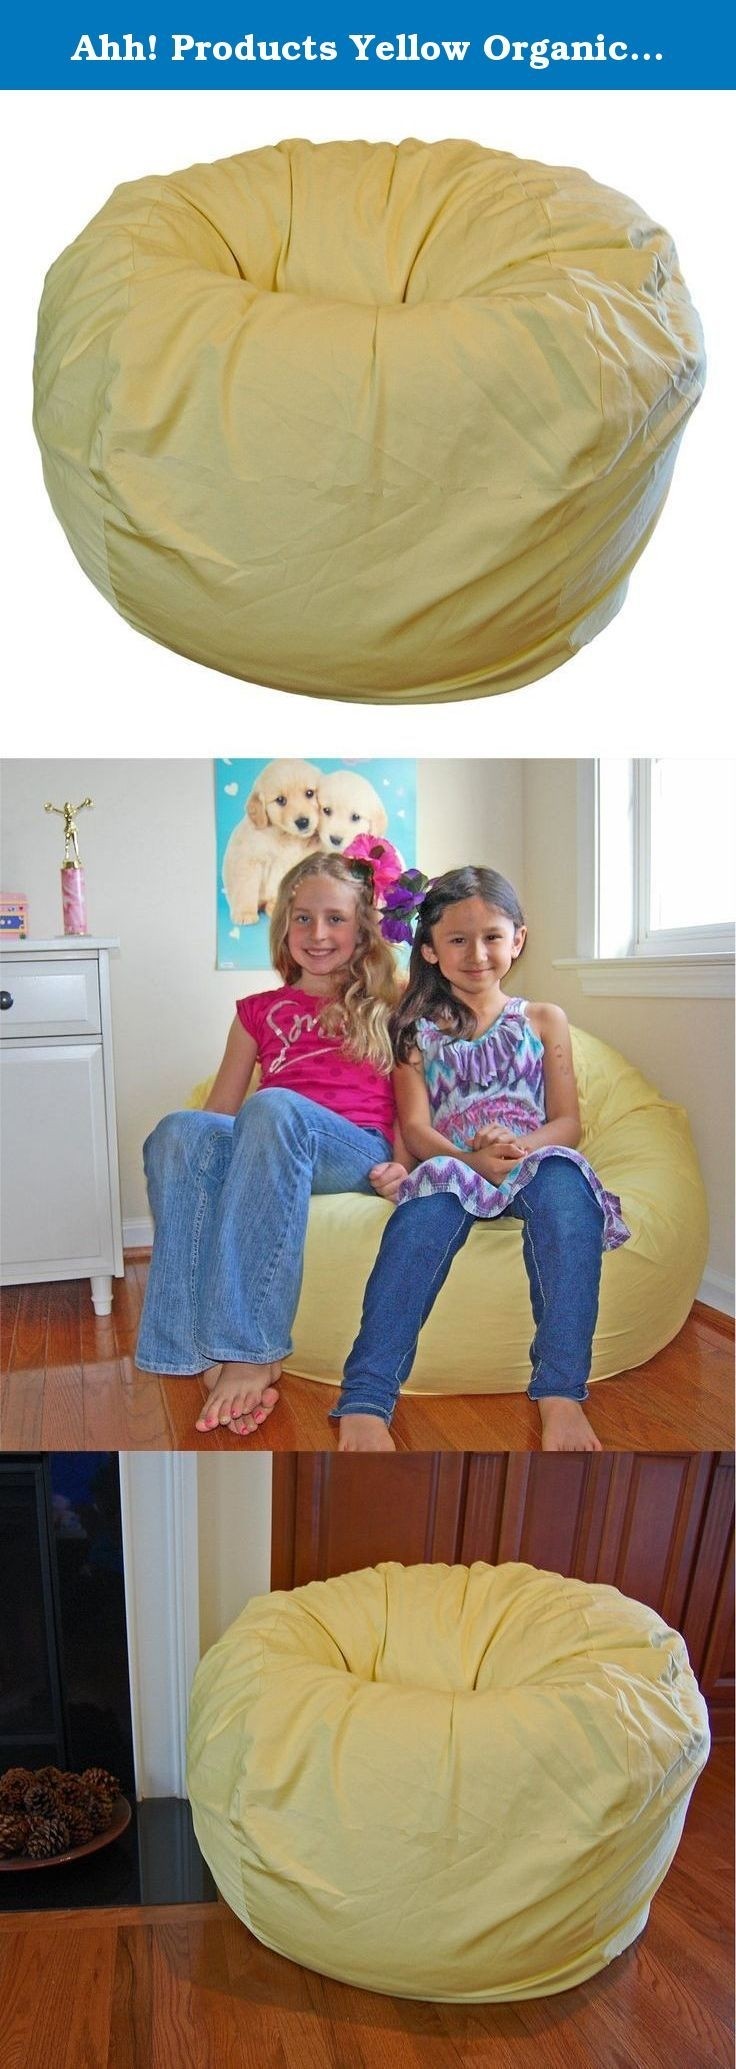 Ahh products yellow organic cotton large bean bag chair